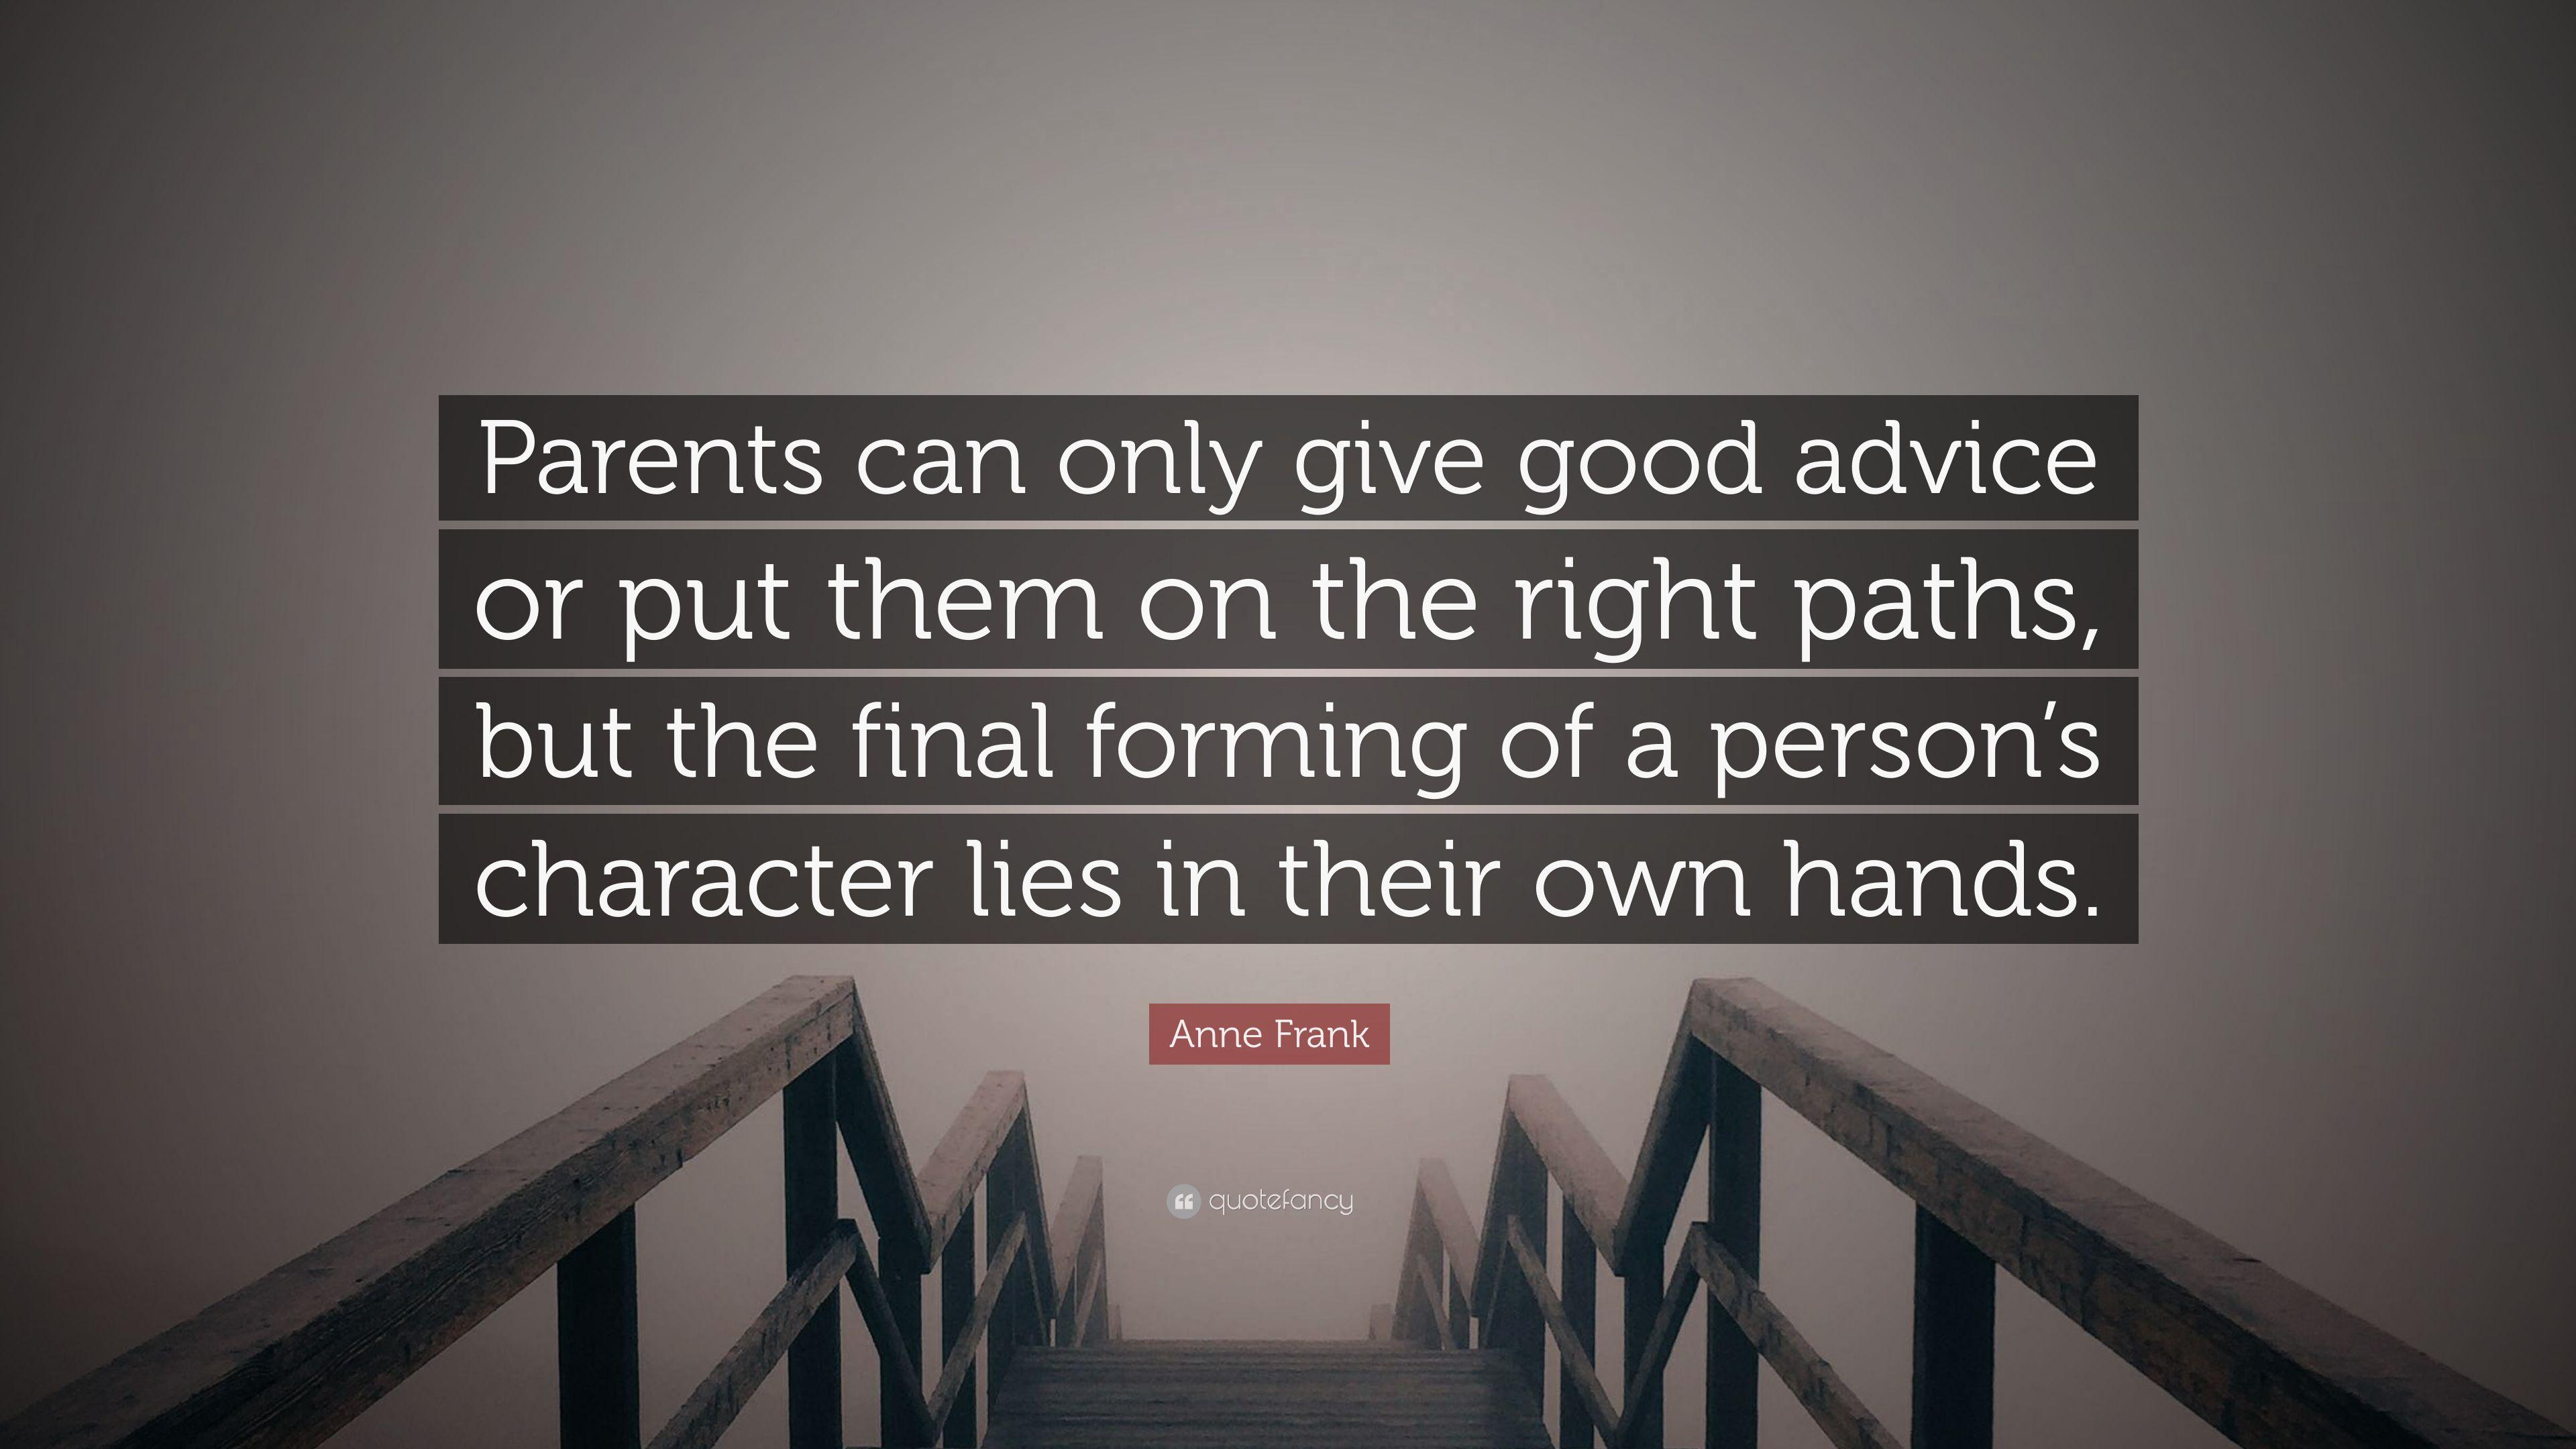 Anne Frank Quote: “Parents can only give good advice or put them